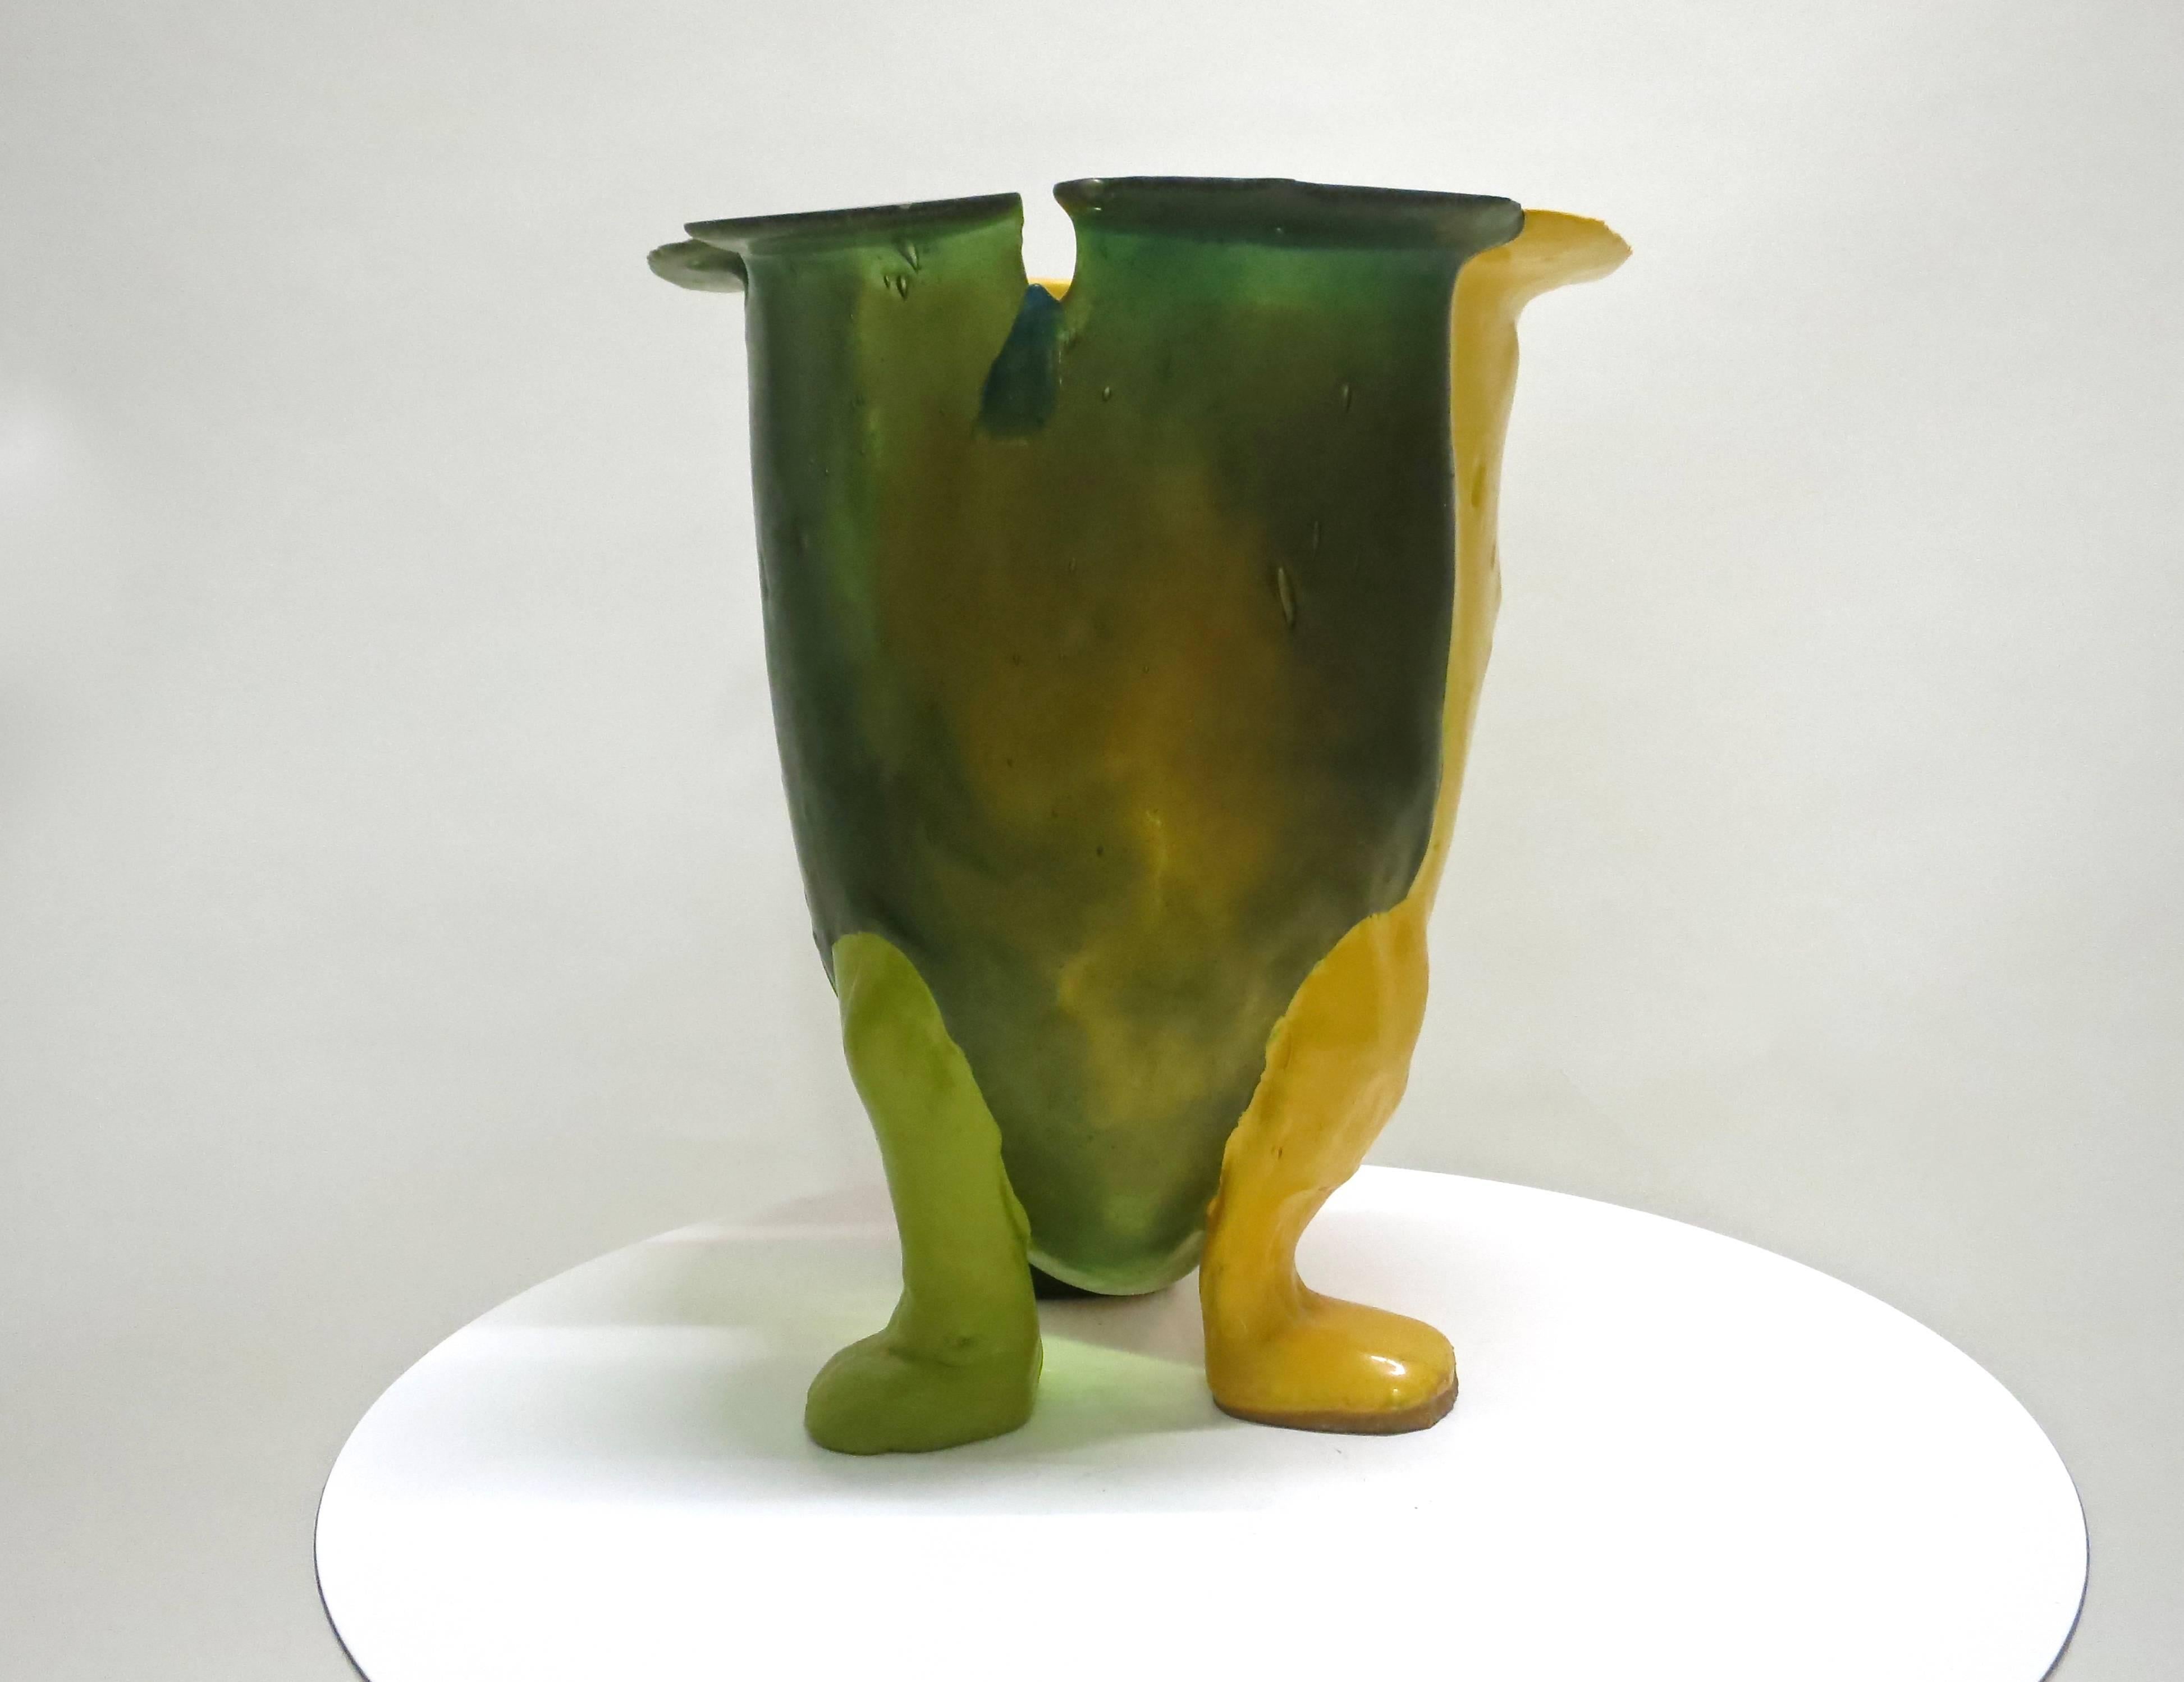 Amazonia Vase by Artist Gaetano Pesce, Fish Design, Purchased in 1990's NYC For Sale 1